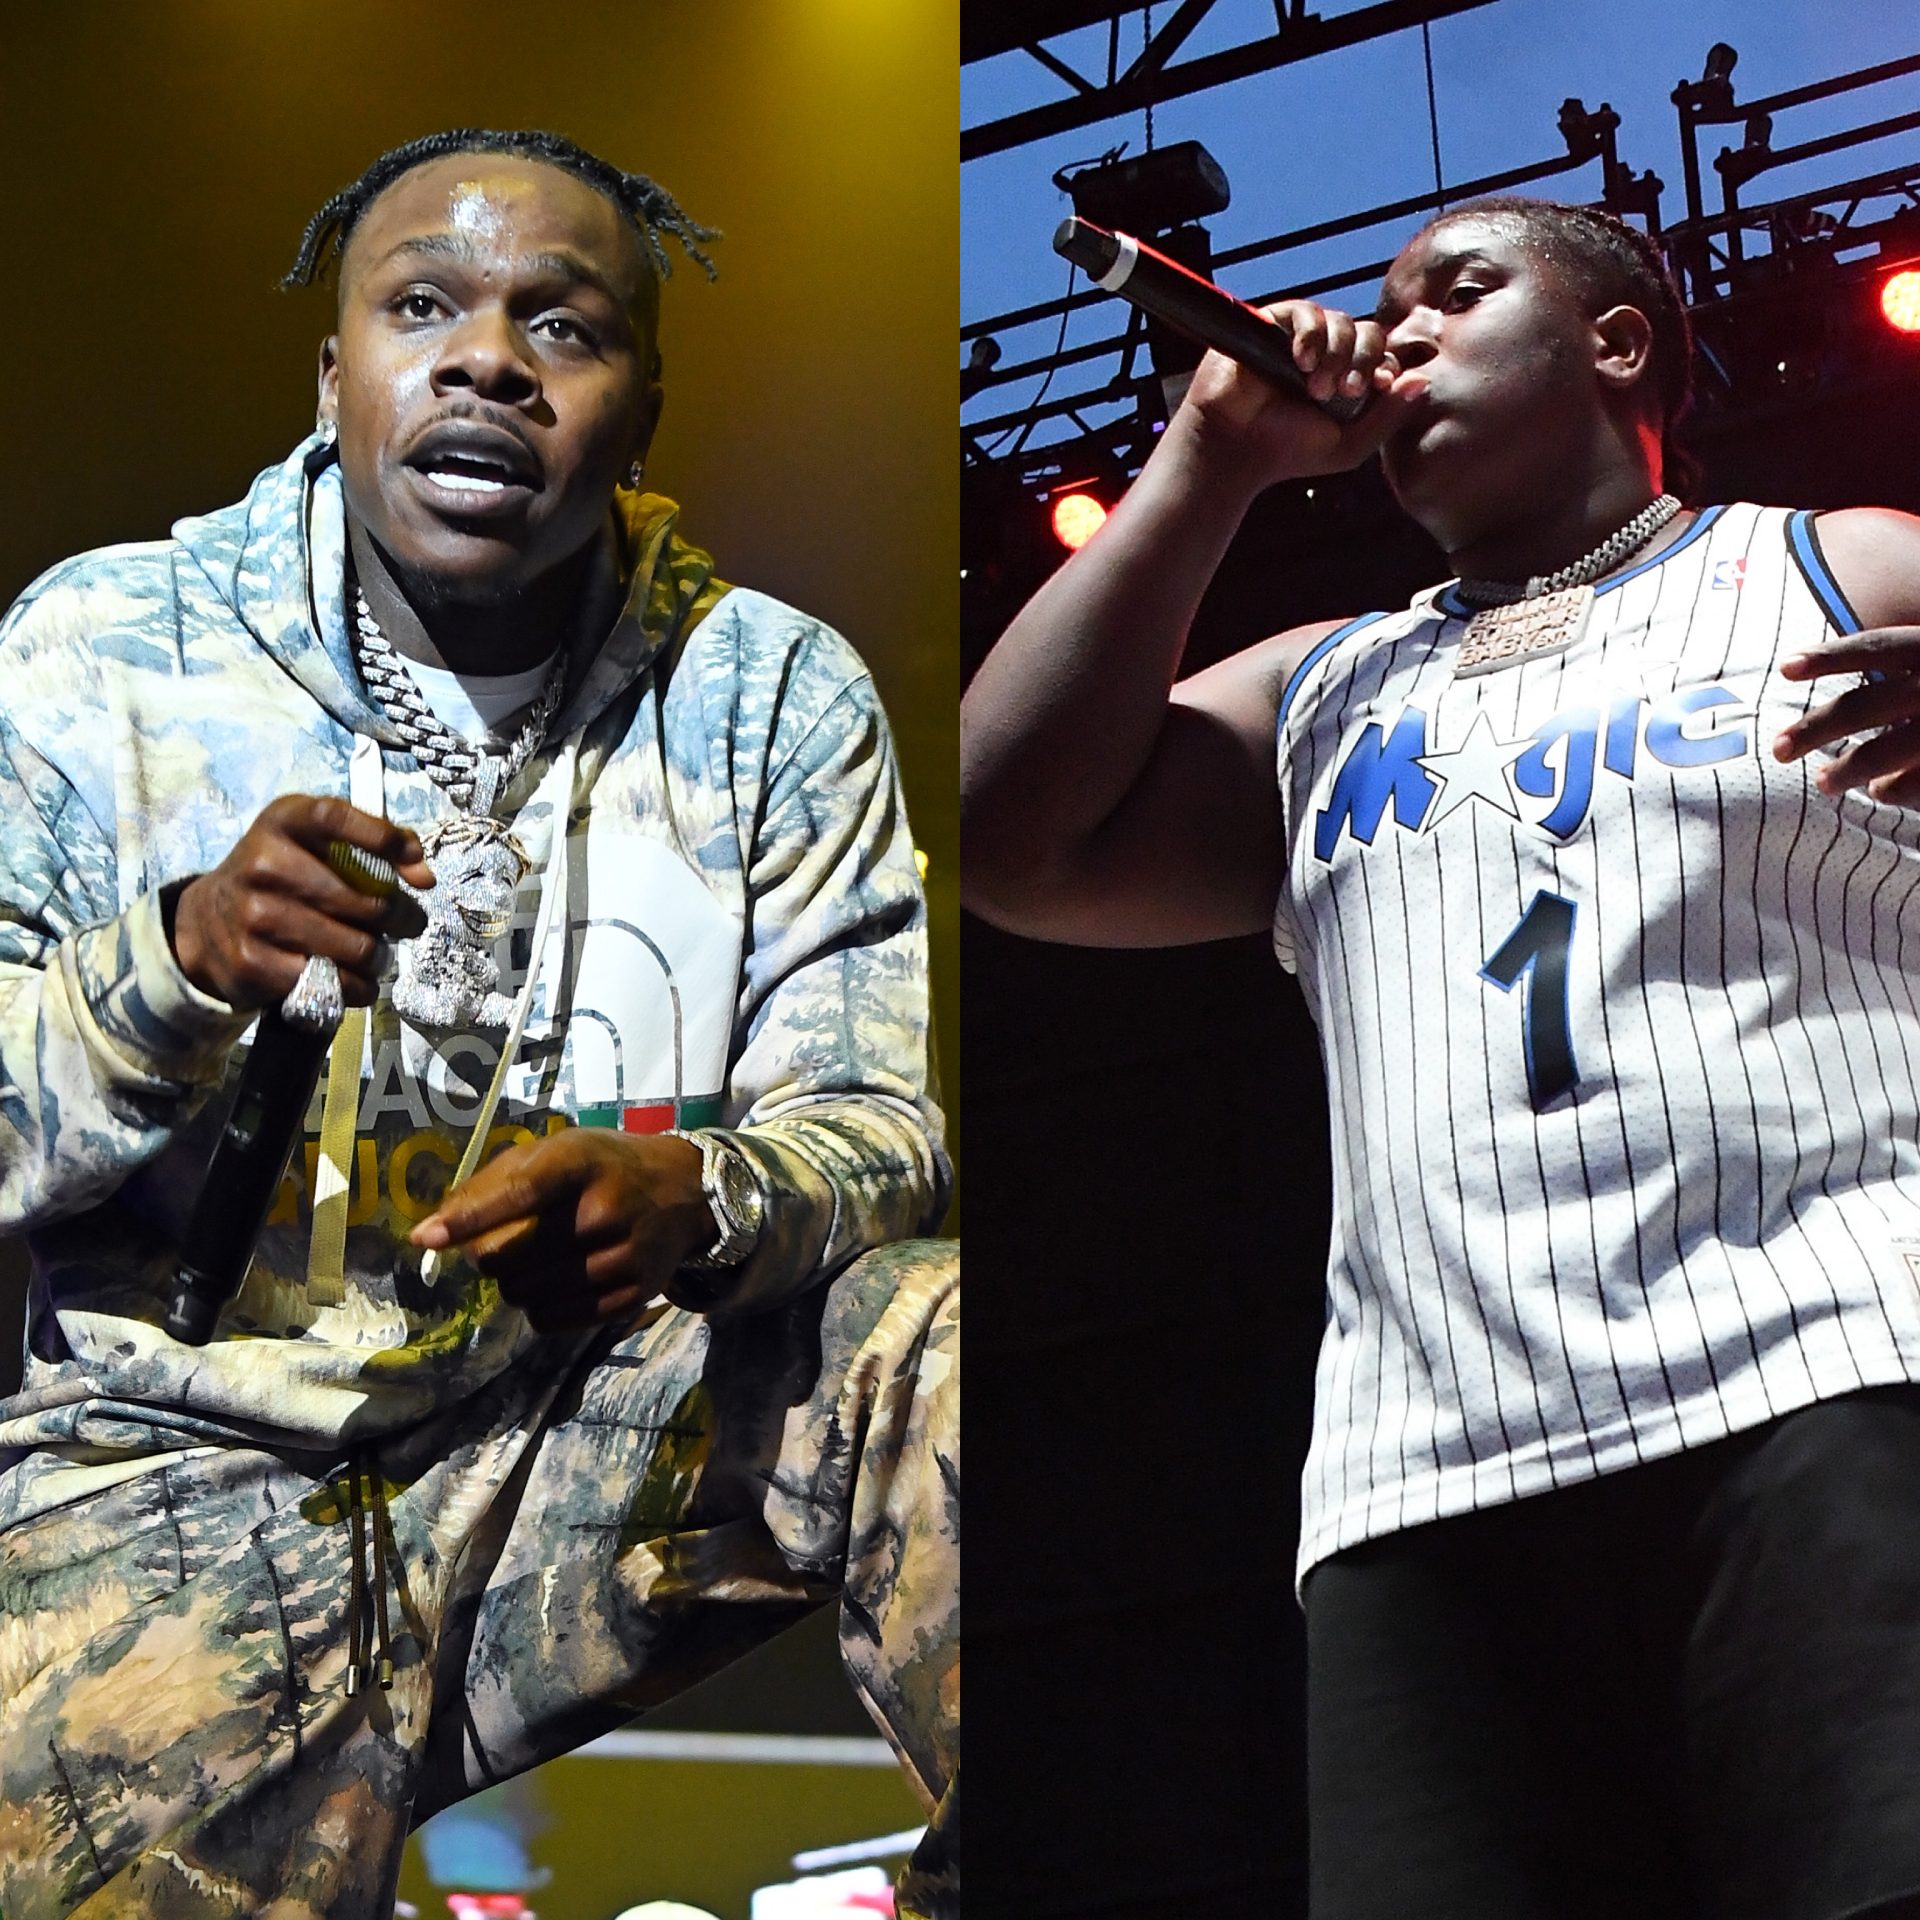 DaBaby Seemingly Involved In Altercation With His Artist Wisdom